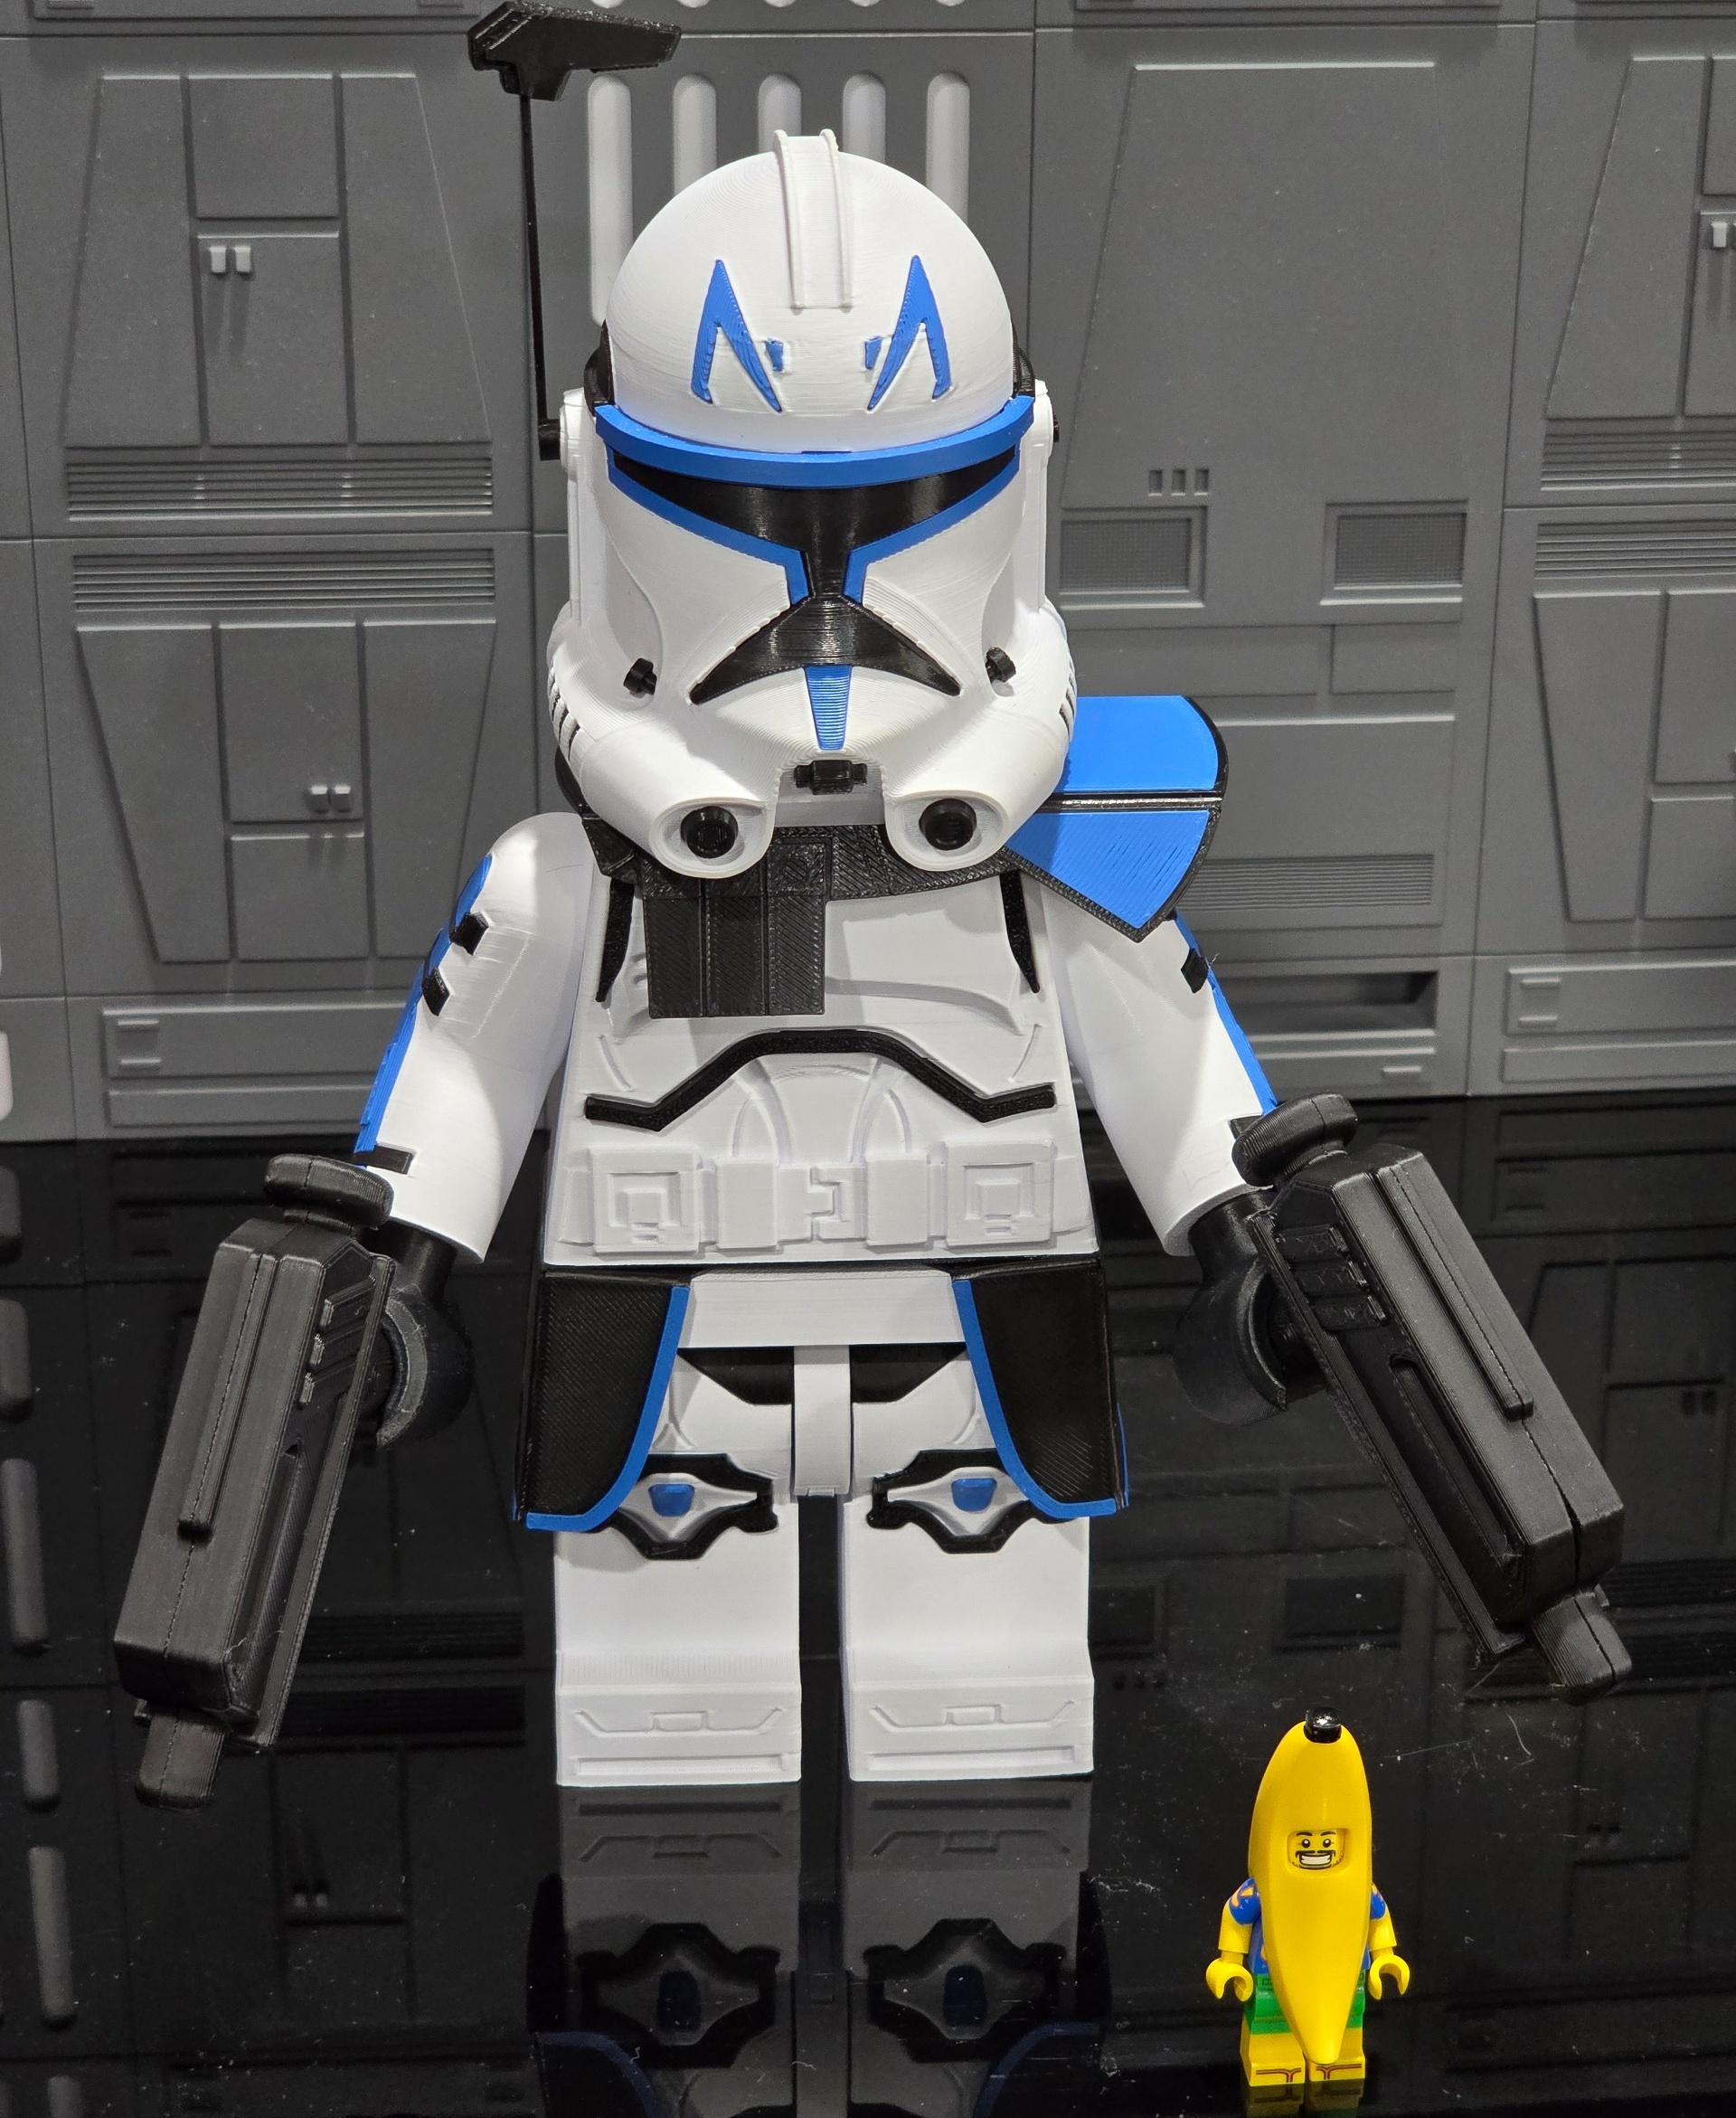 Captain Rex (6:1 LEGO-inspired brick figure, NO MMU/AMS, NO supports, NO glue) - "Yes, I know both Crunch and Kirk. All the captains know each other, but not all are Star Wars LEGO captains. Banana for scale." - 3d model